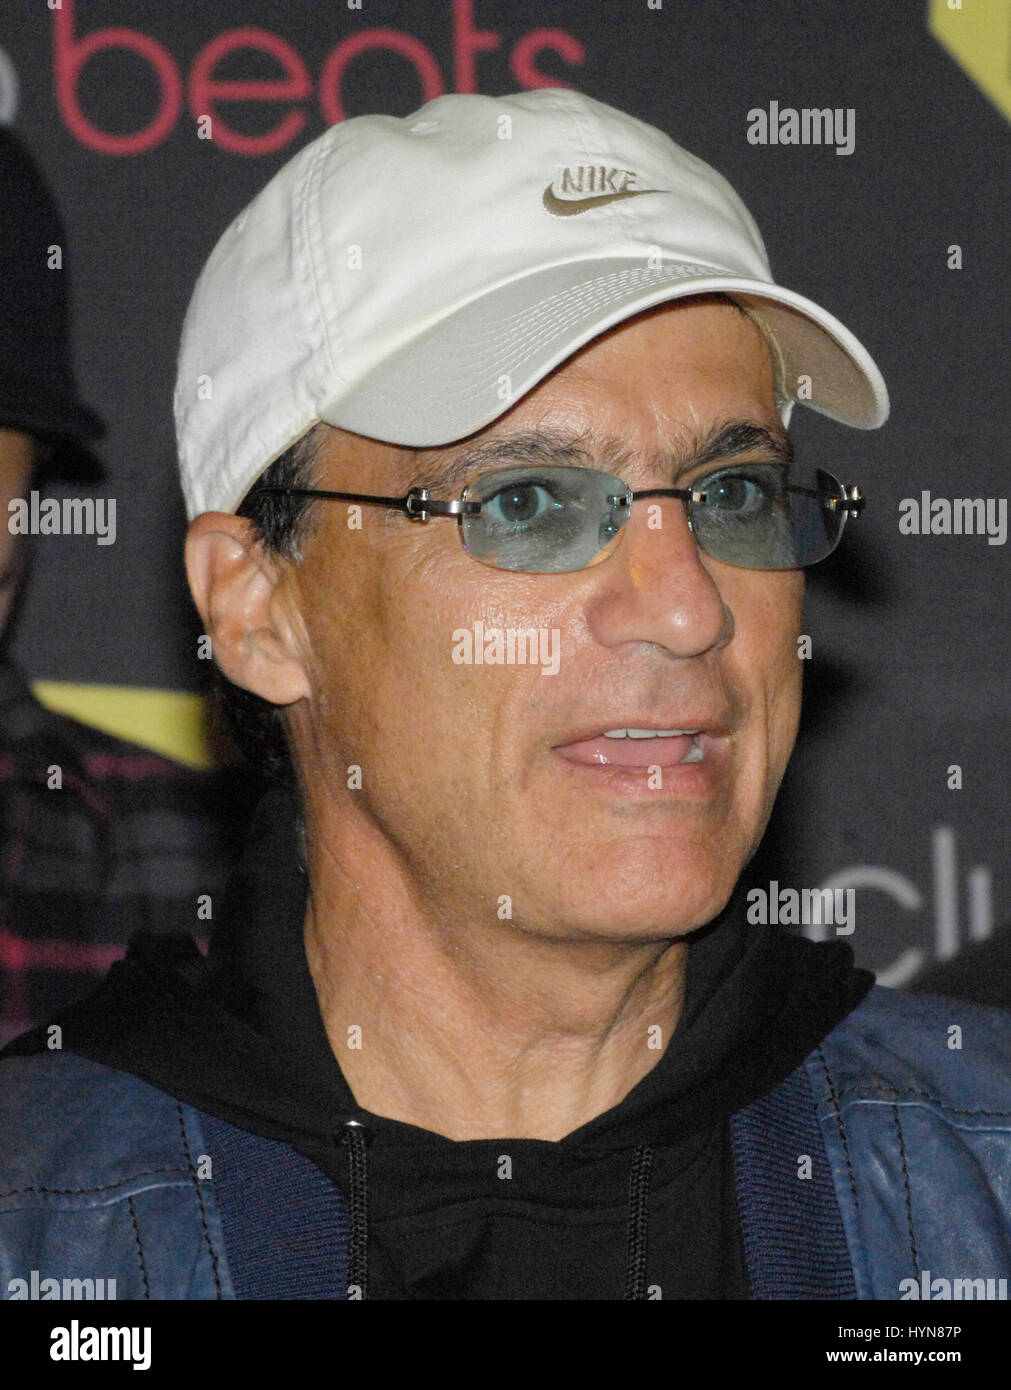 Producer Jimmy Iovine attends Lady Gaga CD release and beats by dr. dre at Best Buy on November 23, 2009 in Los Angeles. Stock Photo